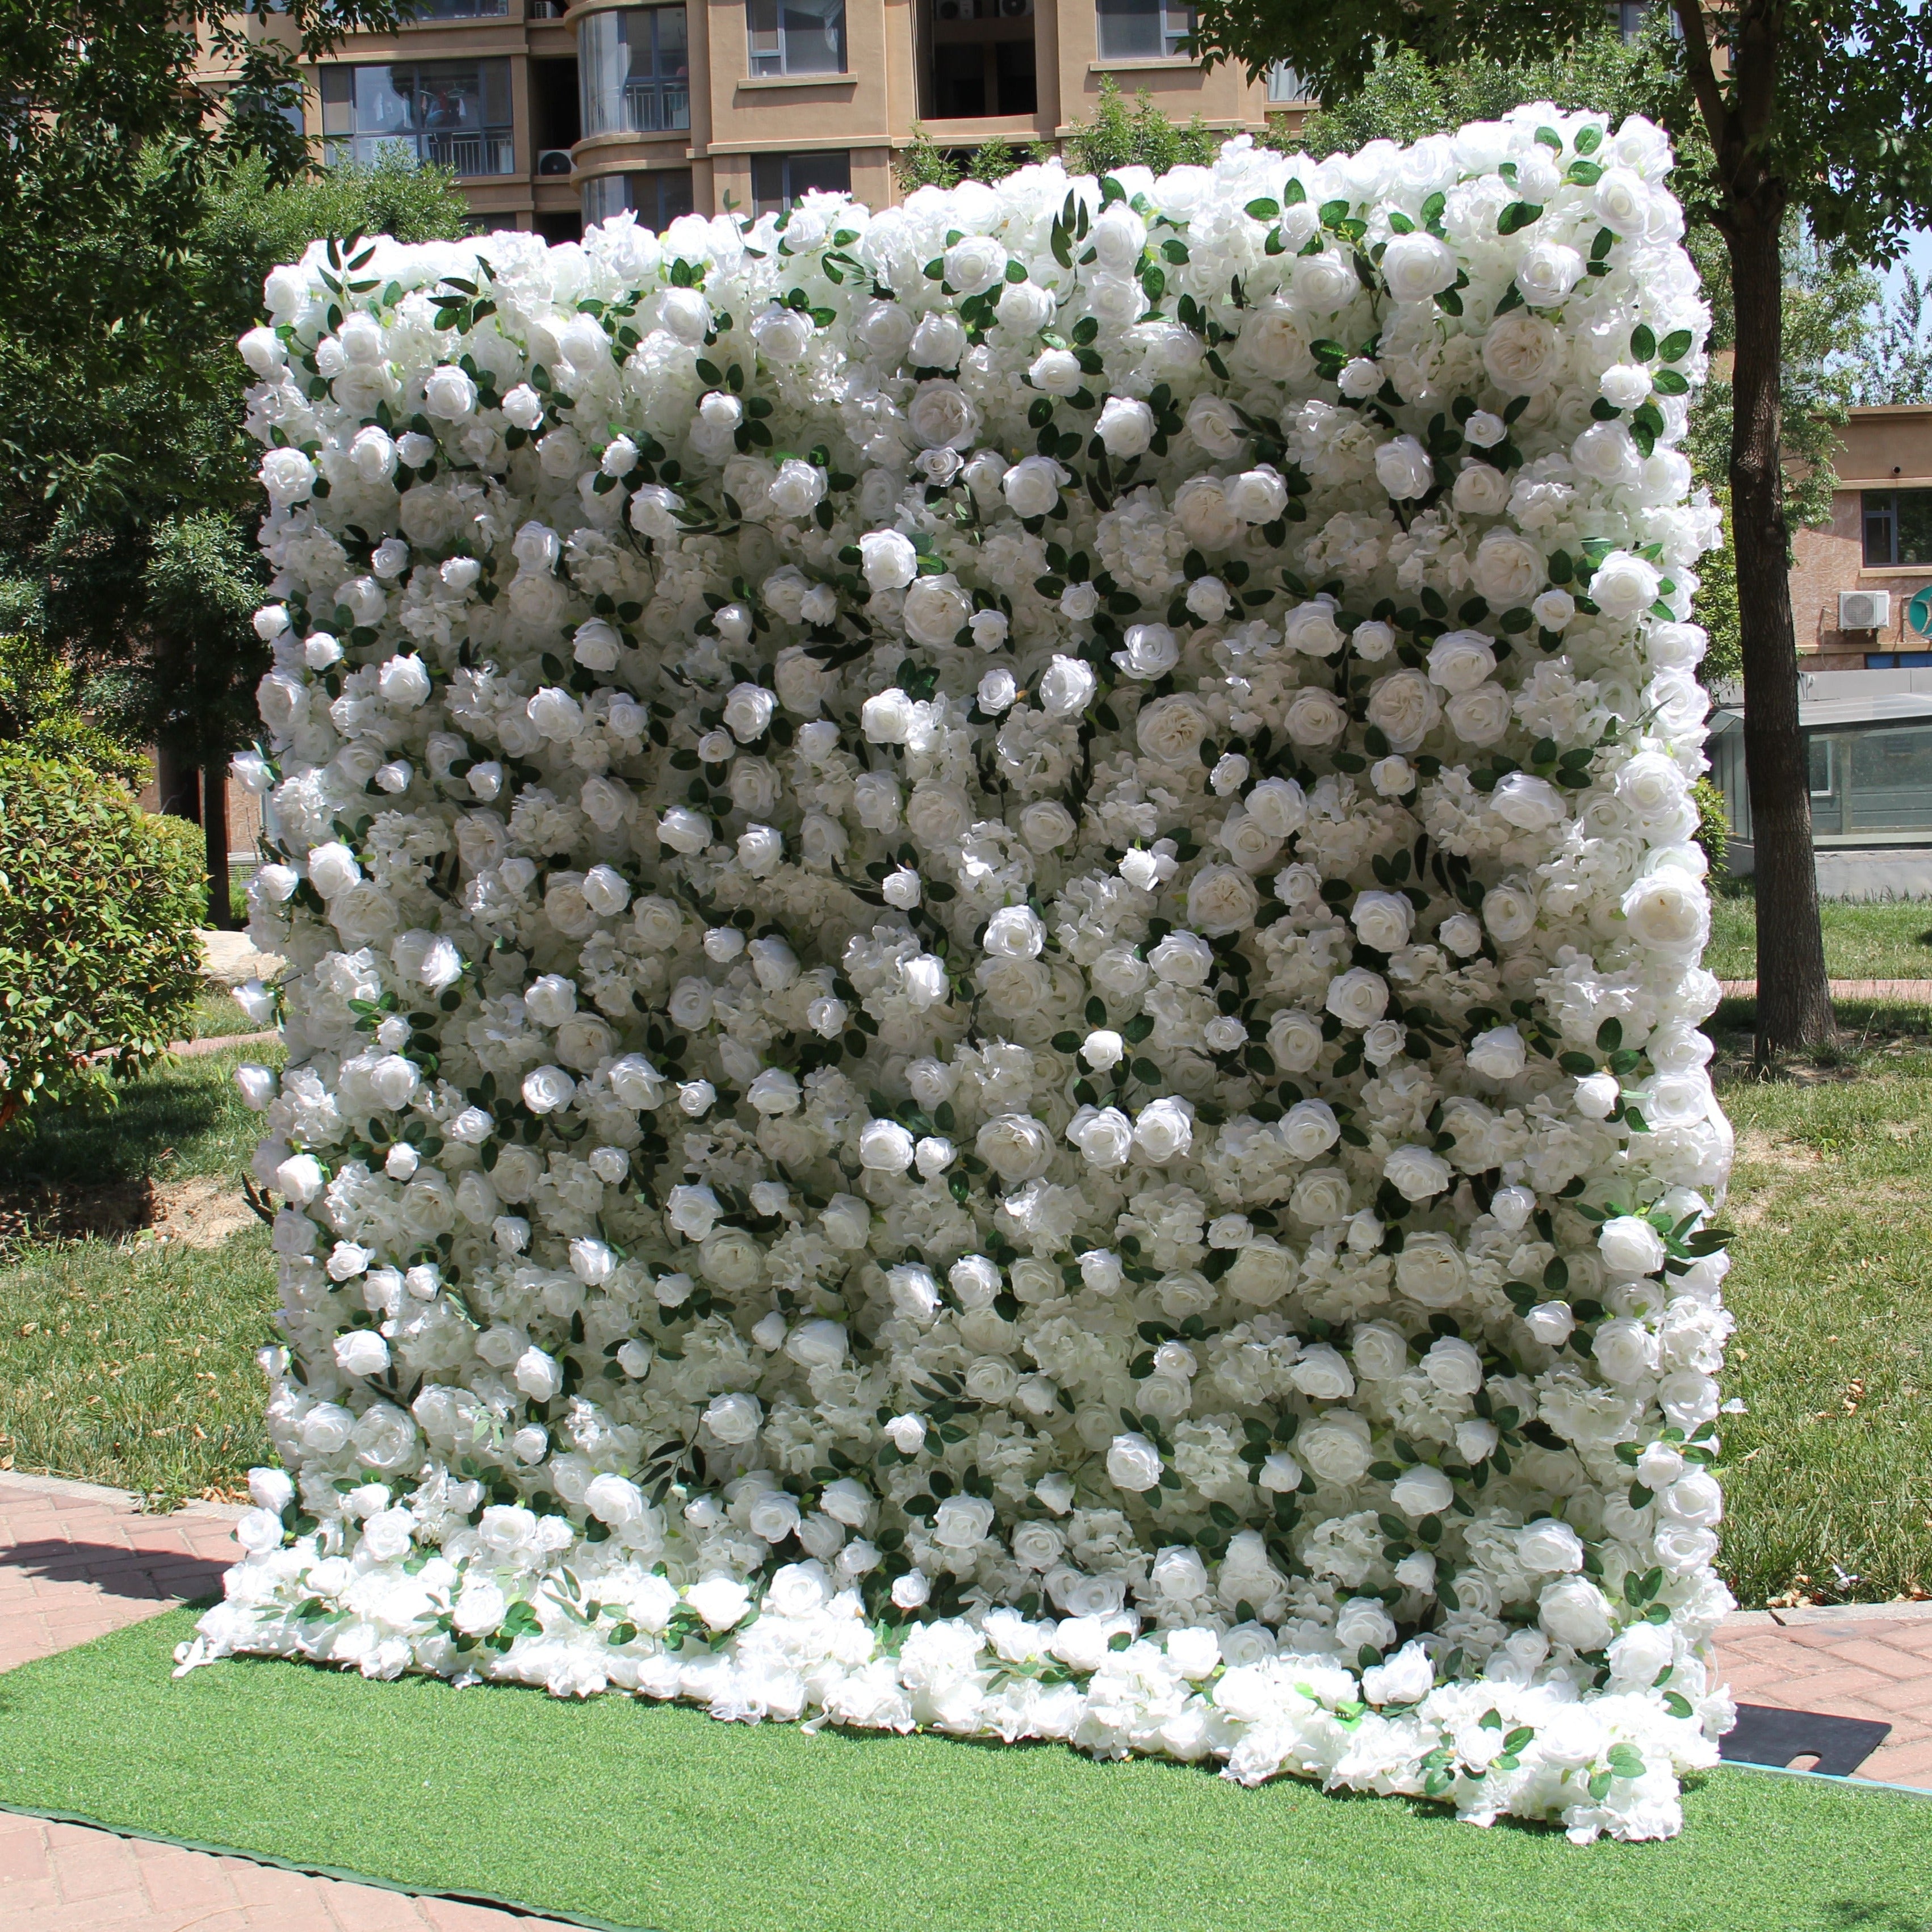 Flower Wall White Peony & Green Fabric Rolling Up Curtain Floral Backdrop Wedding Party Proposal Decor